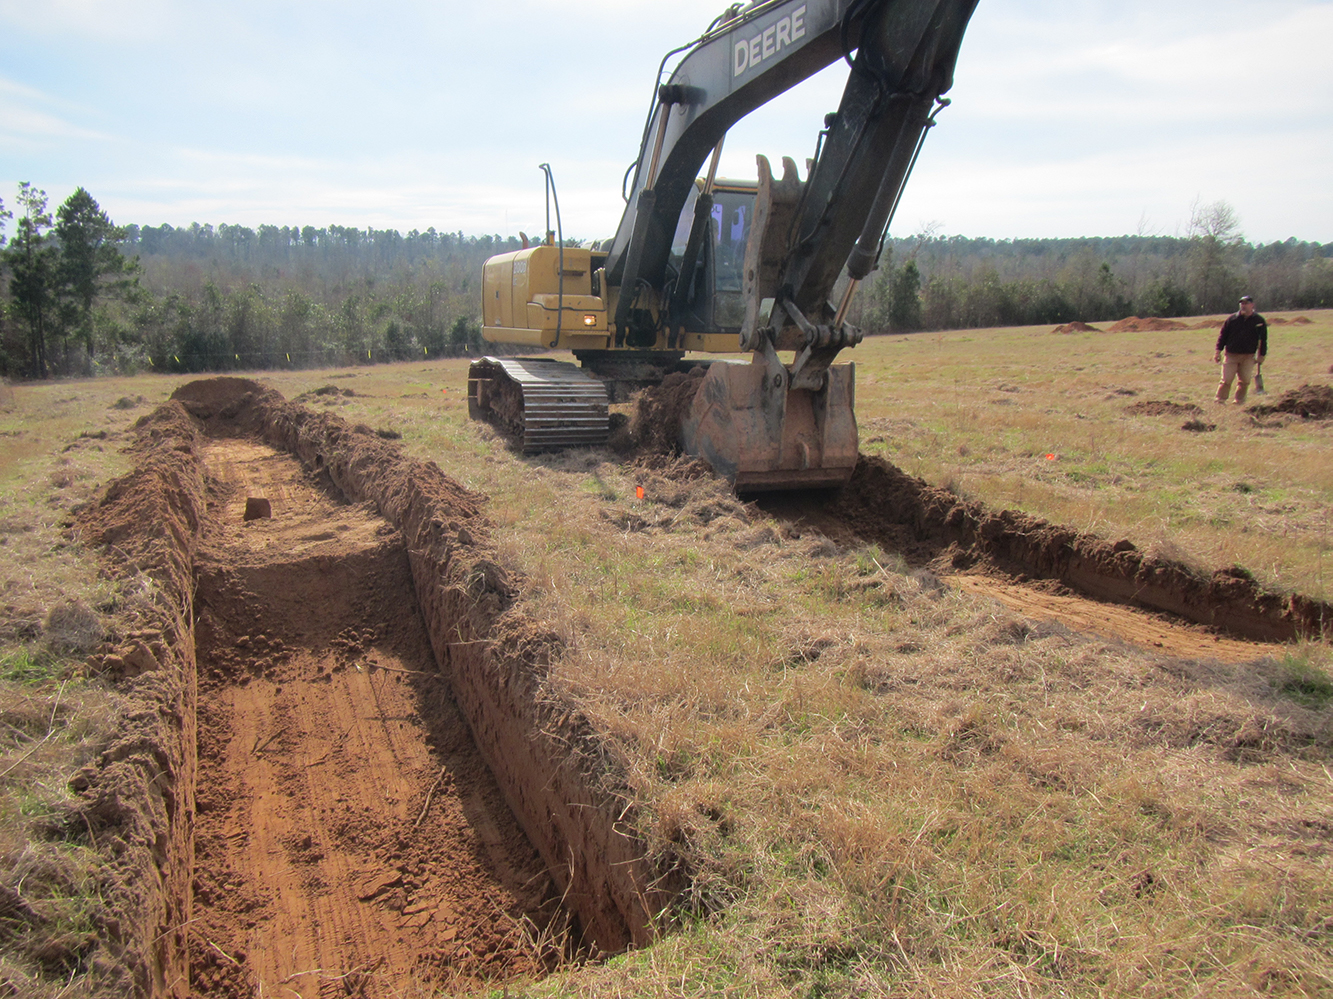 work shot photo; on left is open trench excavated into red sandy soil; on right a large trackhoe is digging a second trench